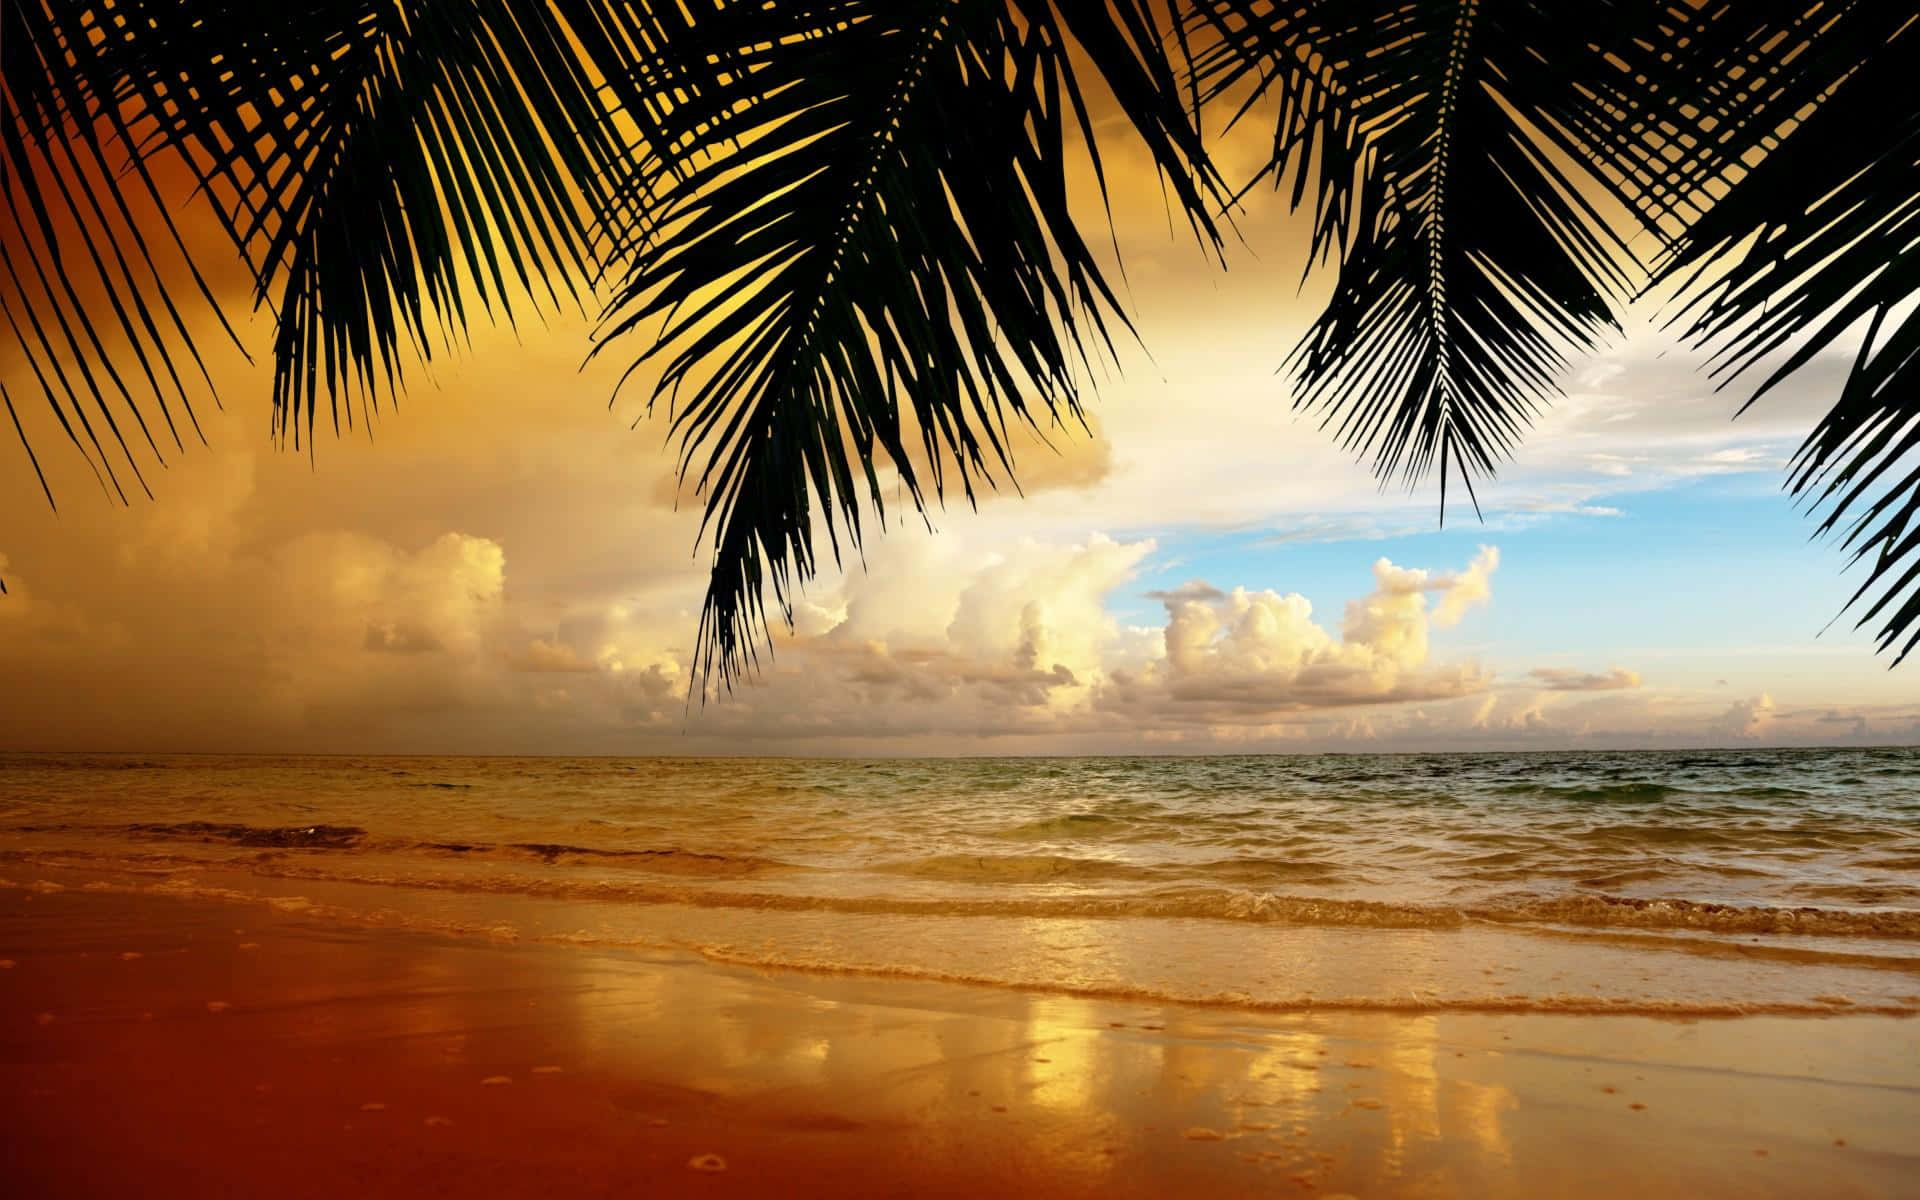 A Beach With Palm Trees And Clouds In The Background